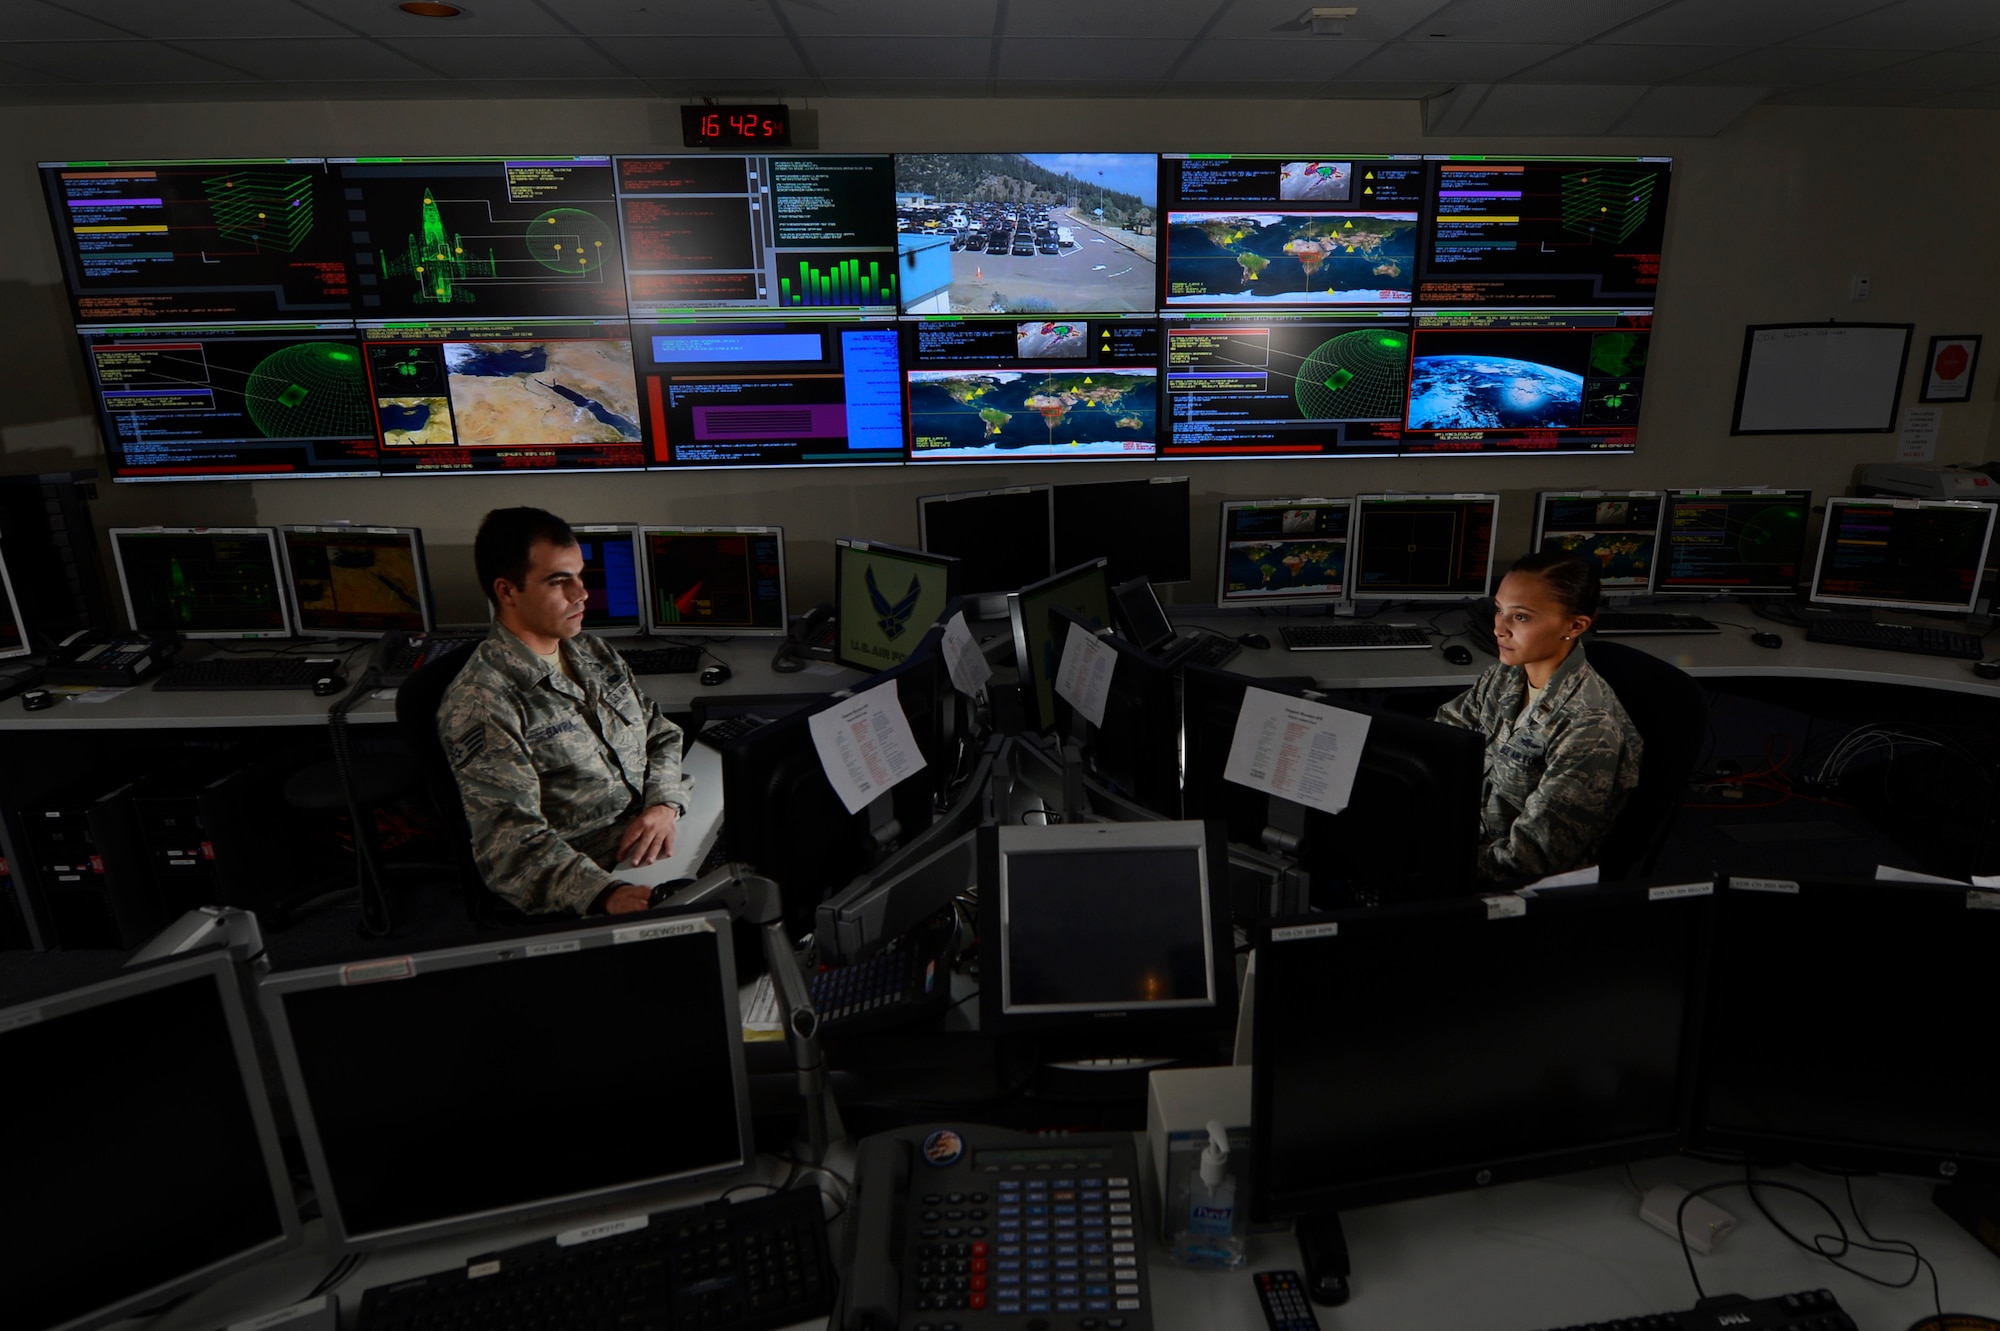 Staff Sgt. Alex Garviria, left, and 2nd Lt. Rachel James work in the Global Strategic Warning and Space Surveillance System Center Sept. 2, 2014, at Cheyenne Mountain Air Force Station, Colo. The 721st Communication Squadron provides continuous monitoring of strategic missile warning systems to ensure constant dataflow of key information to National Command Authorities, North American Aerospace Defense Command, U.S. Northern Command, U.S. Strategic Command, Air Force Space Command, and strategic and theater commanders.  Garviria is a senior systems controller with the 721st CS and James is a 721st CS crew commander. (U.S. Air Force photo/Airman 1st Class Krystal Ardrey)